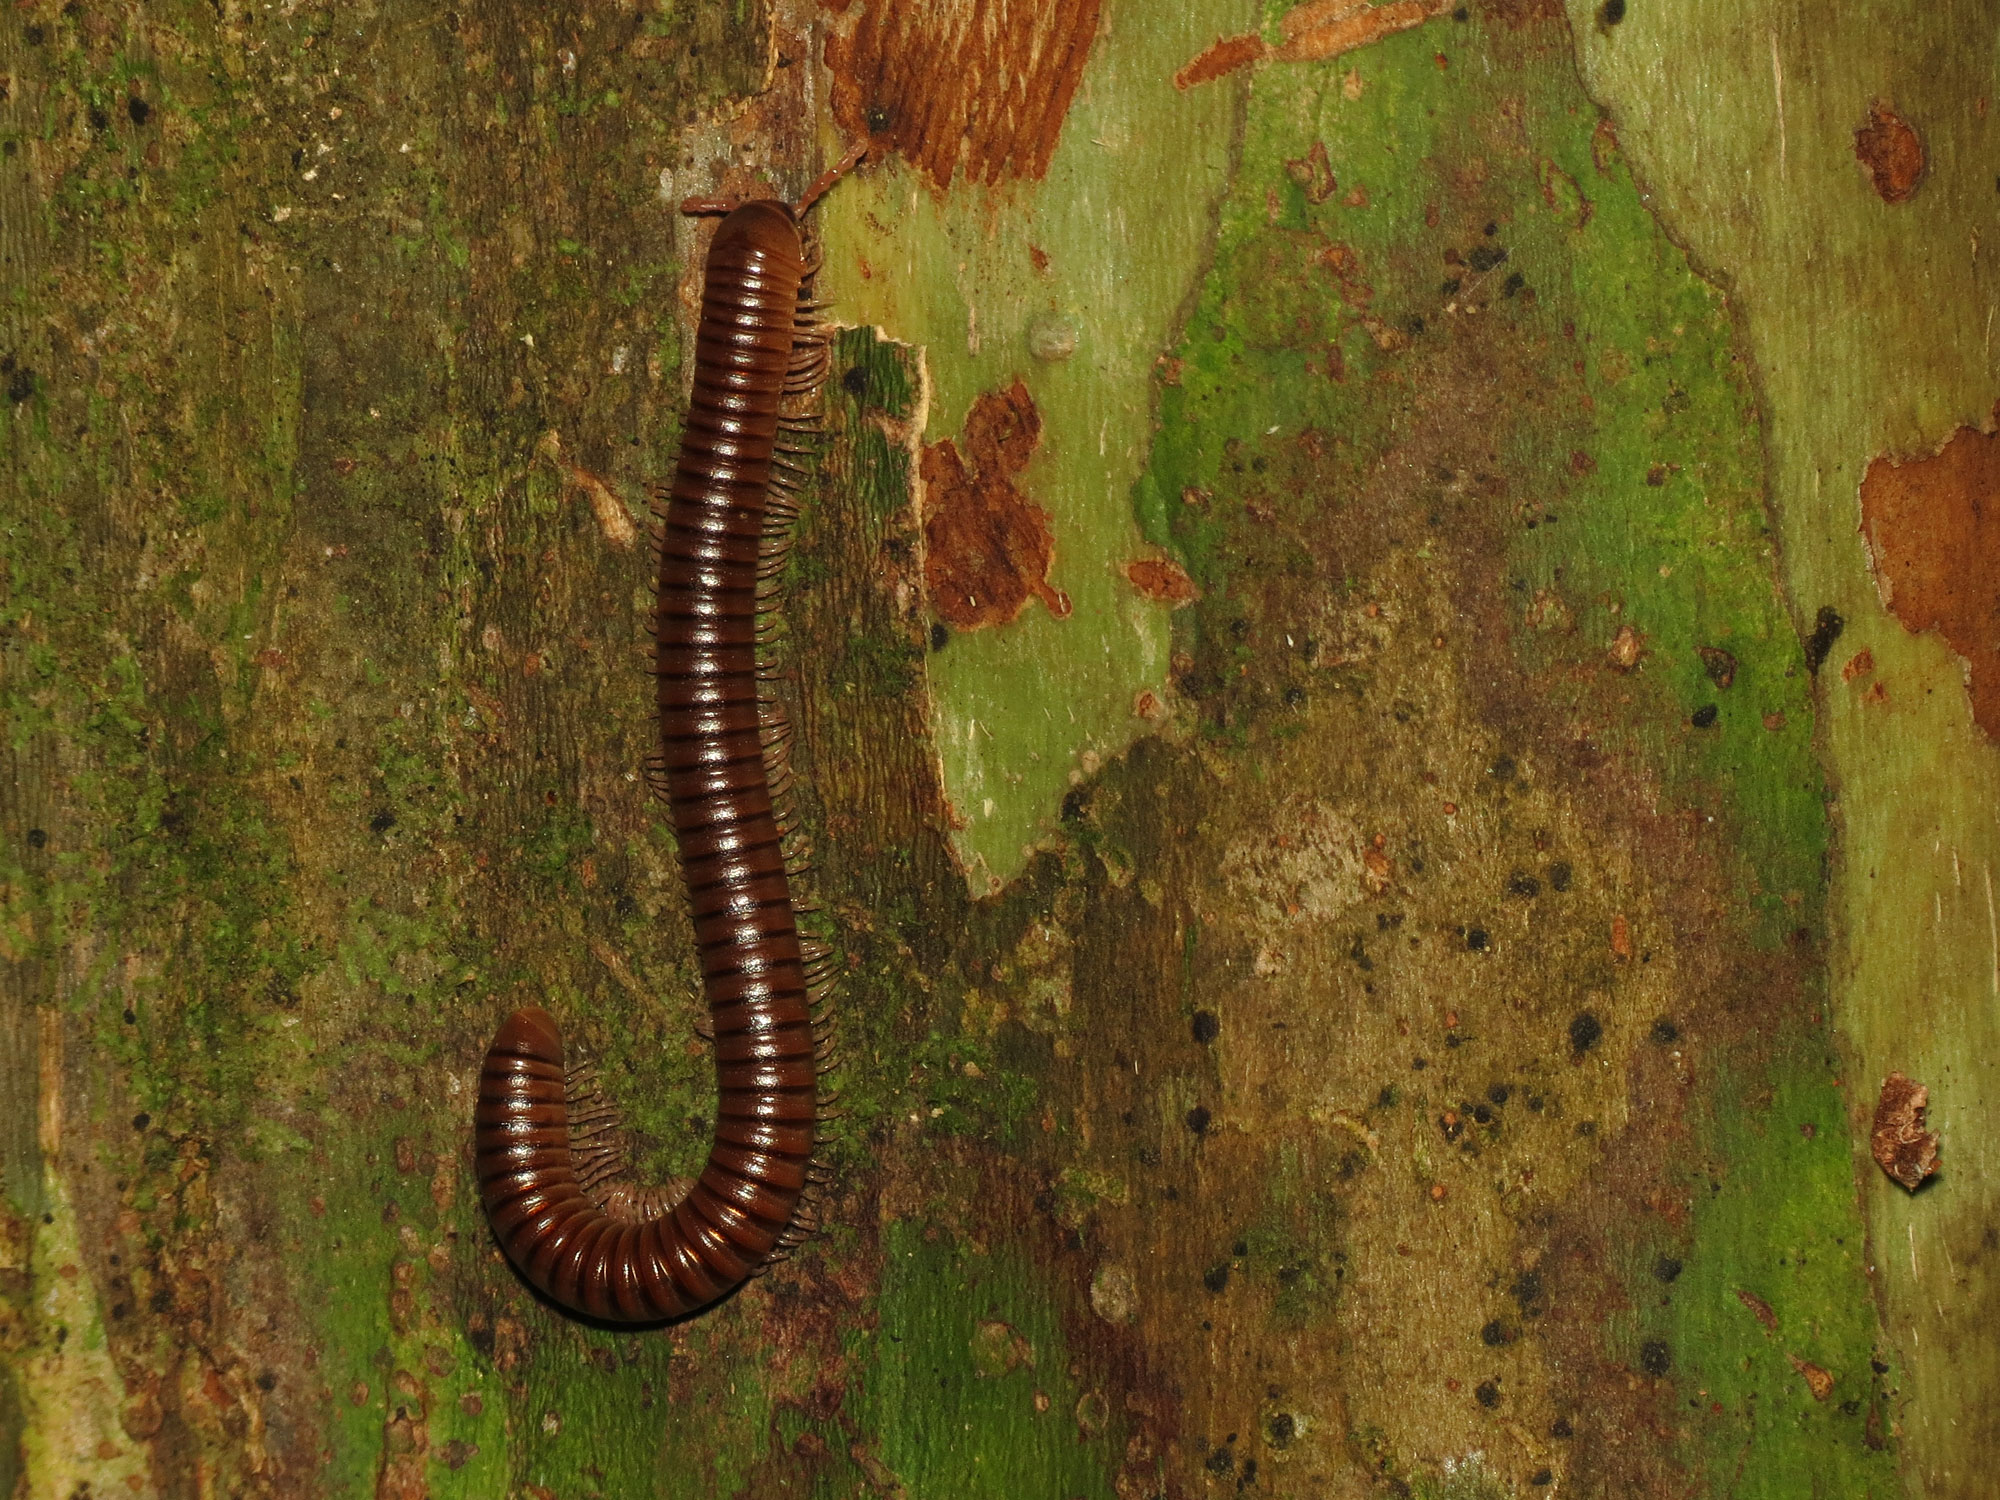 a brown caterpillar is walking along the green tree